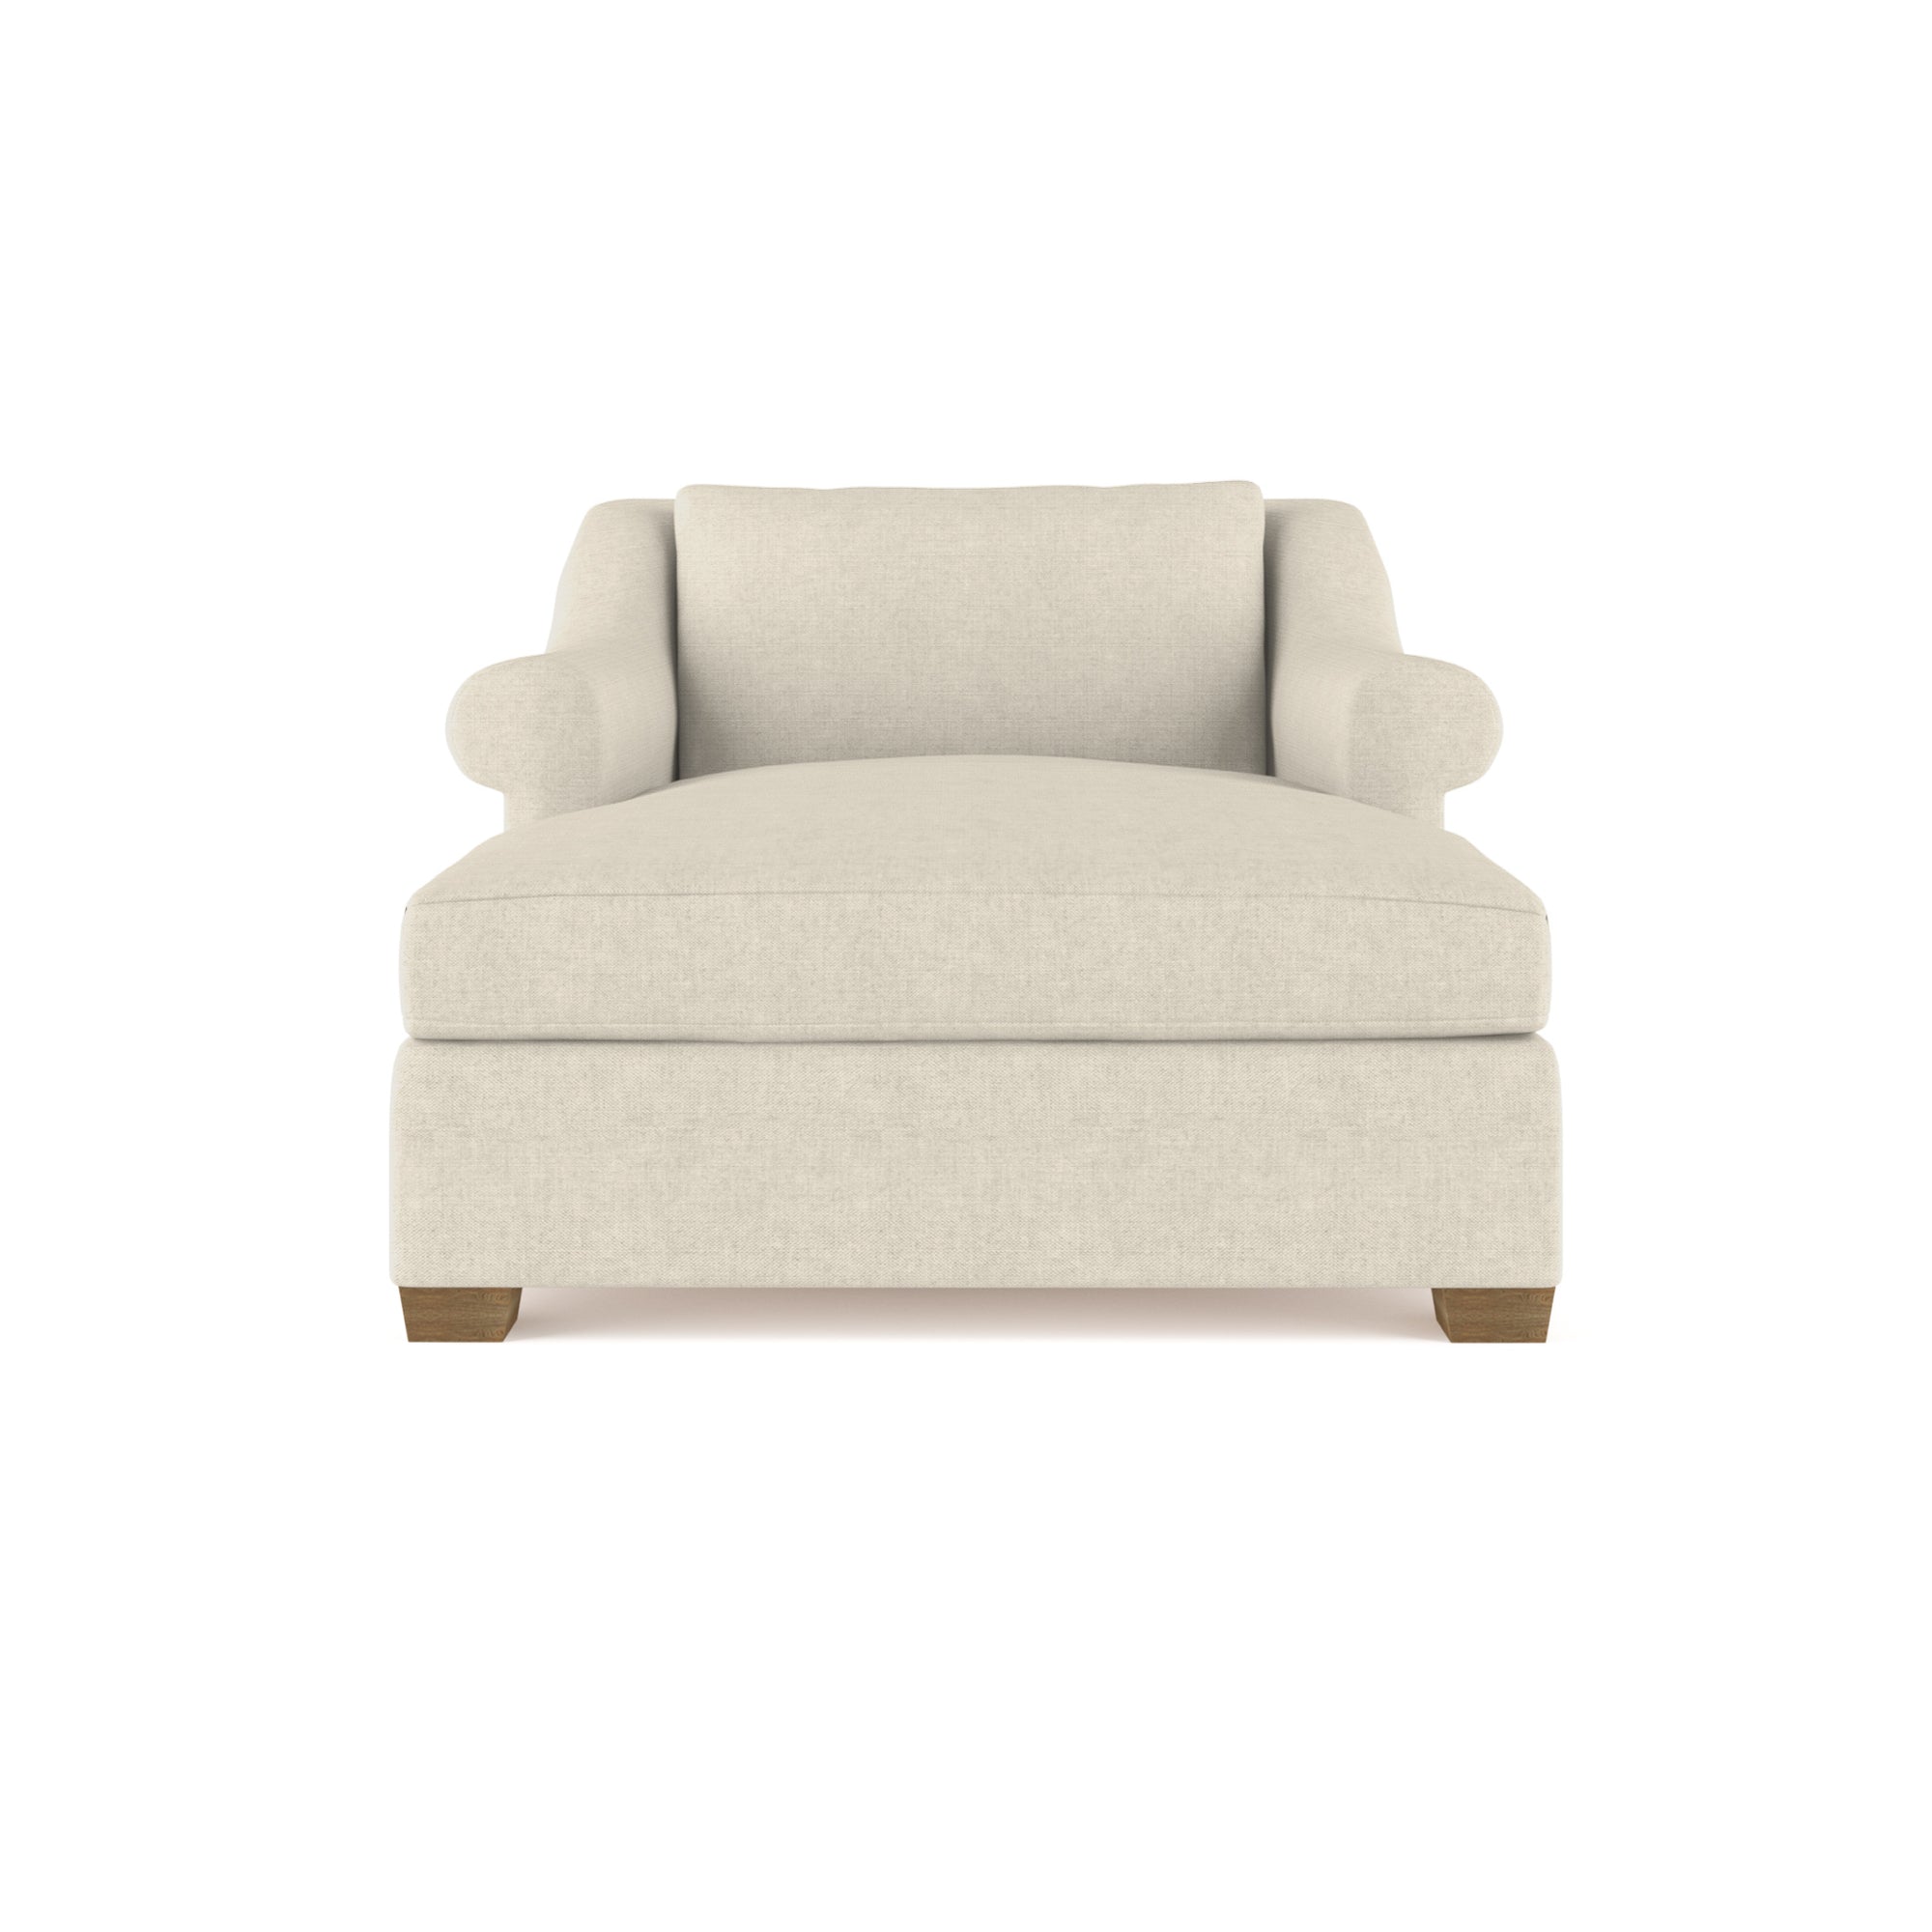 Thompson Chaise - Oyster Box Weave Linen